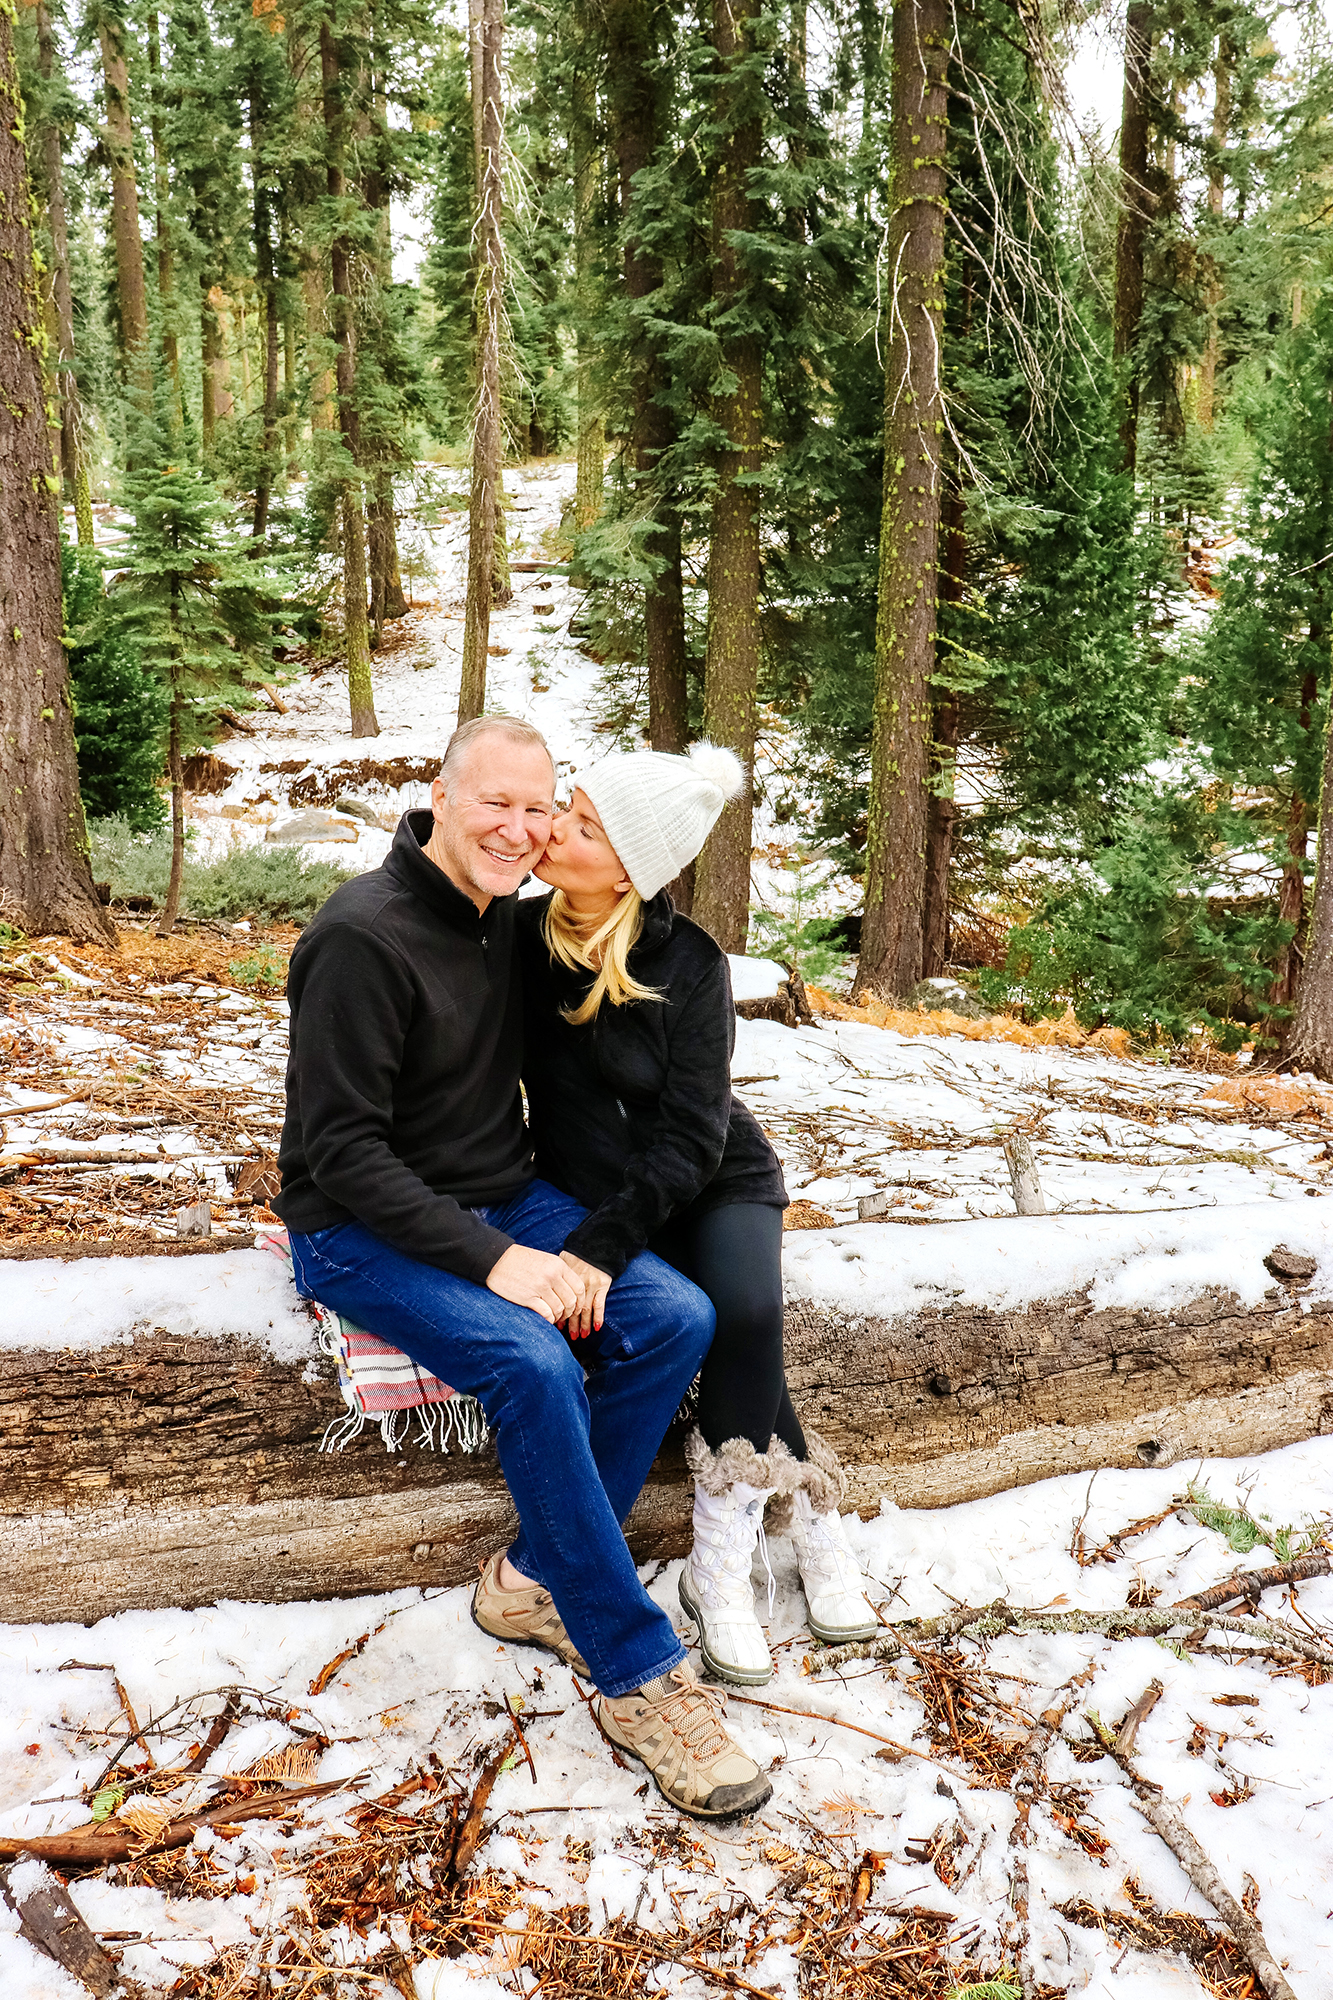 Coziest Winter Wear & Holiday Gifts at the Lake - Lands End winterwear review - up to 60% off. Our favorite warm and affordable jackets and other options. 